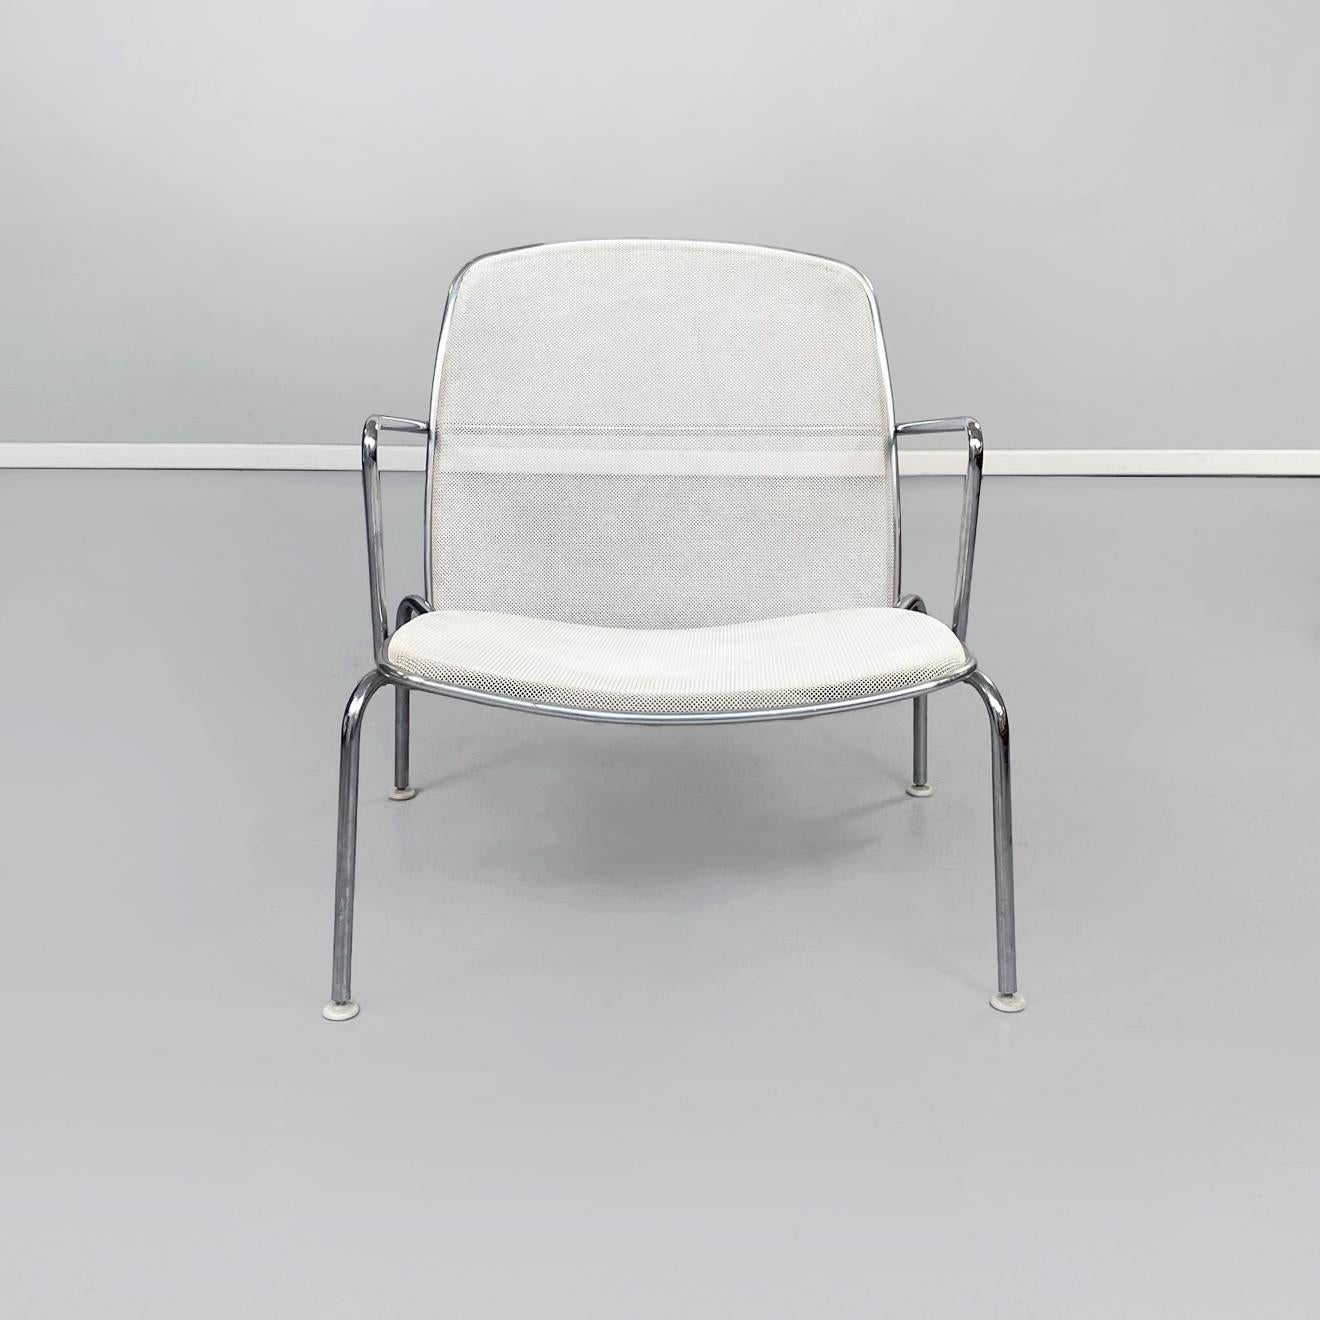 Post-Modern Italian 21st Century White Metal Steel Web Armchairs by Citterio for B&B, 2000s For Sale